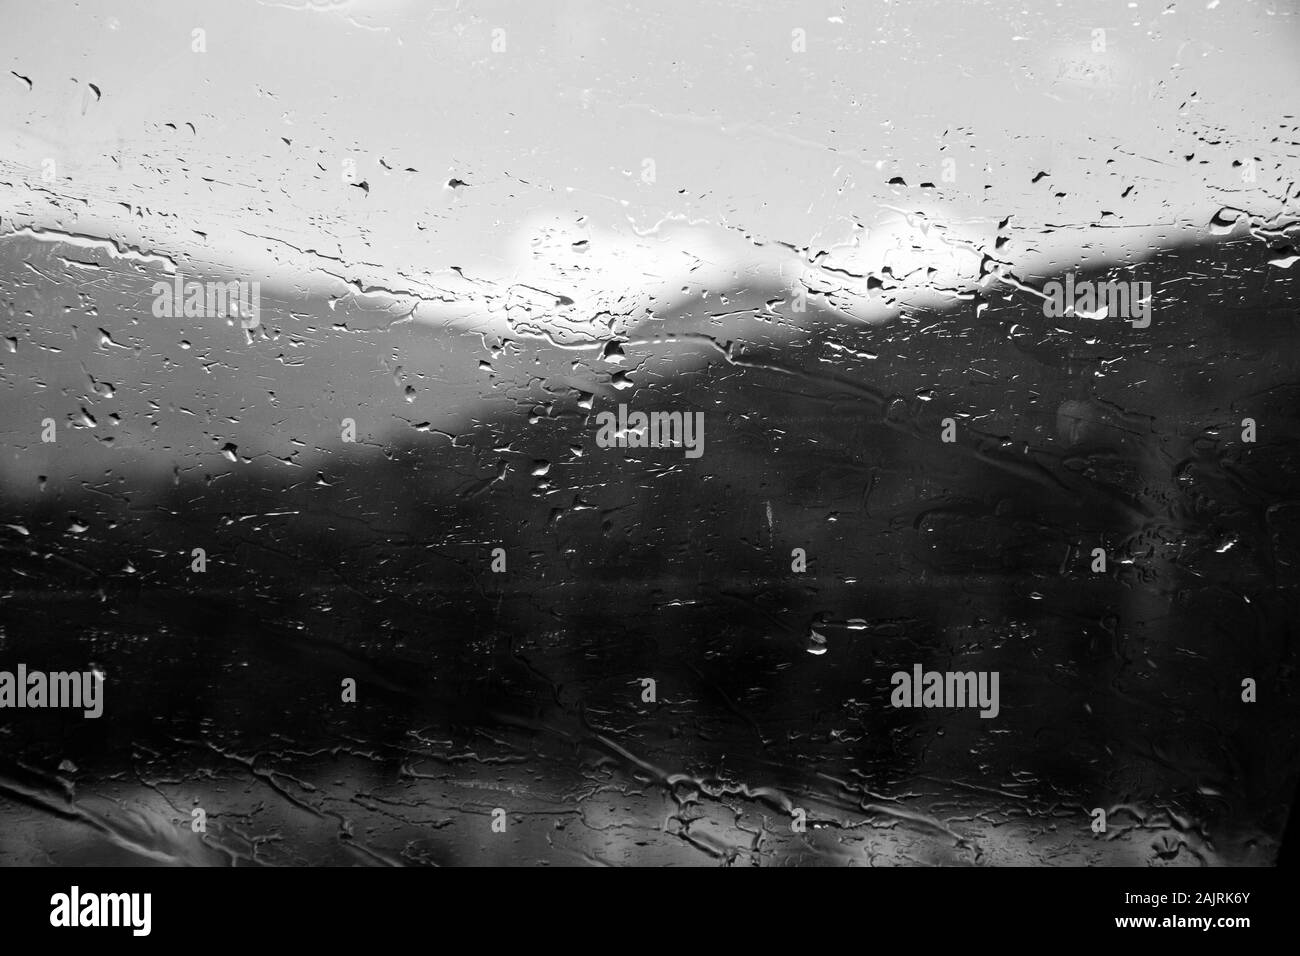 Car window with rain drops. Driving in rain. Weather background. Rainy glass. Stock Photo